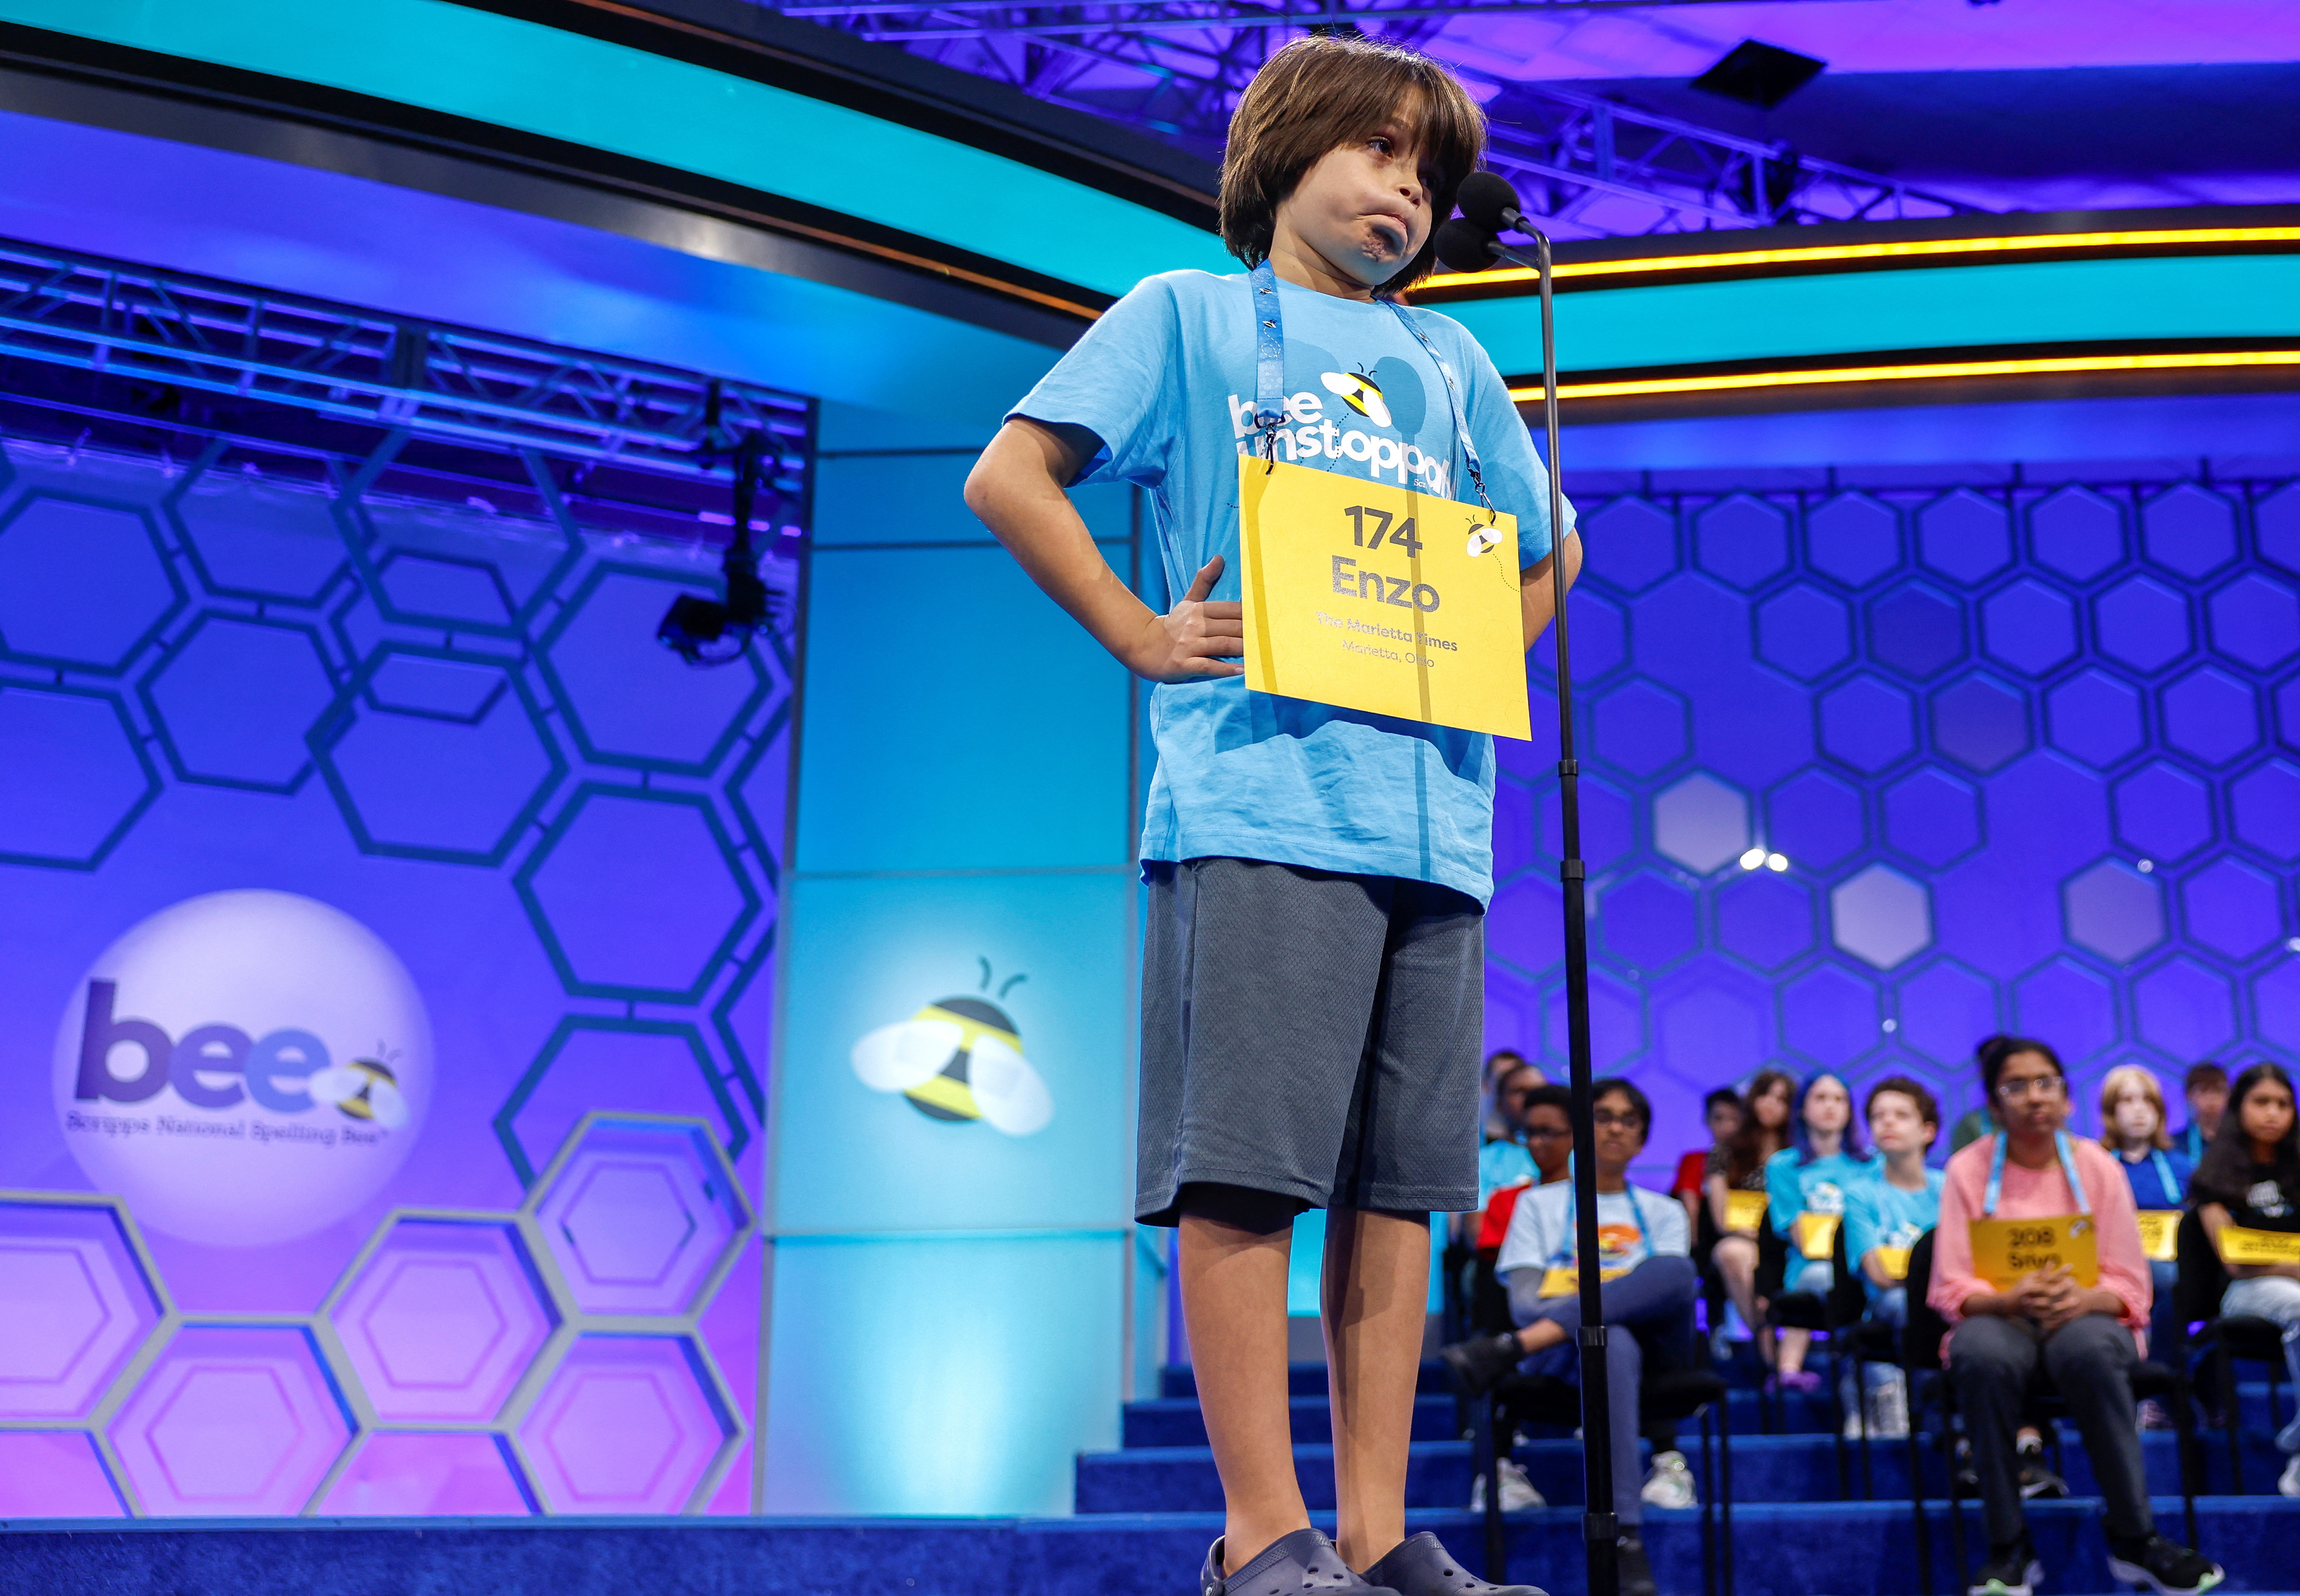 Student spellers compete in the opening rounds of the annual Scripps National Spelling Bee in Maryland